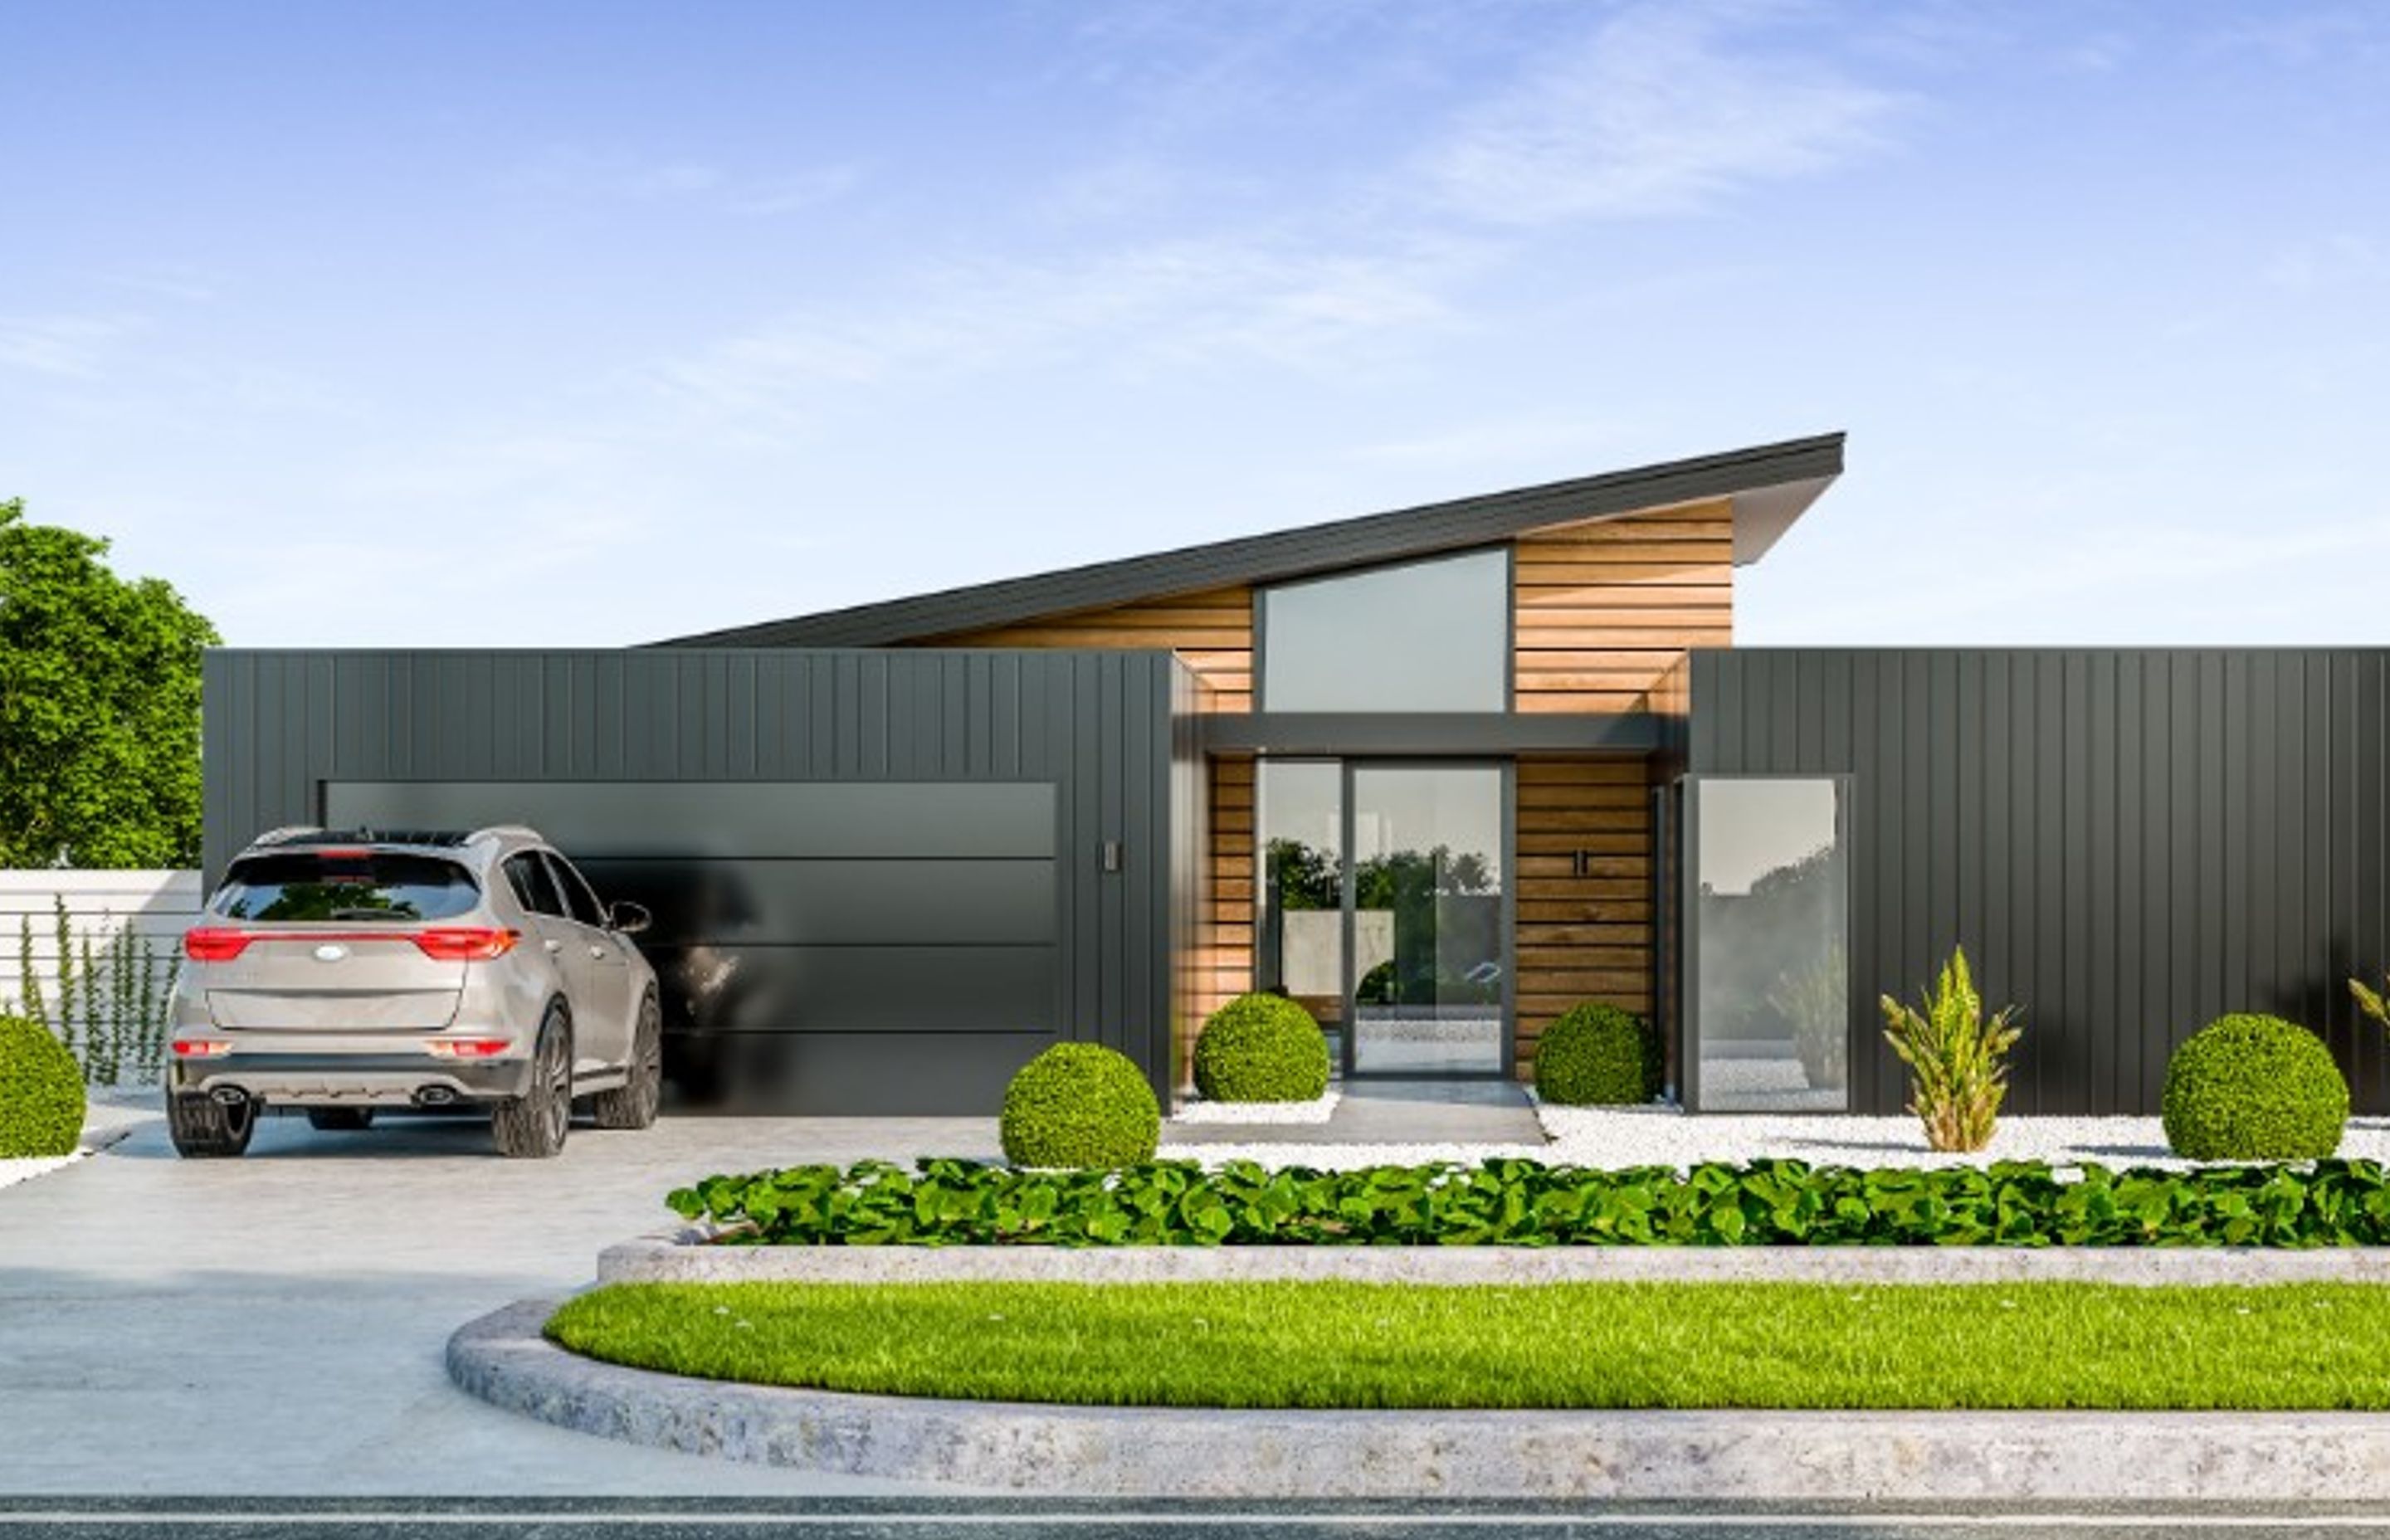 Waikawa, our 200 sqm 3-bedroom home design, pictured above. 